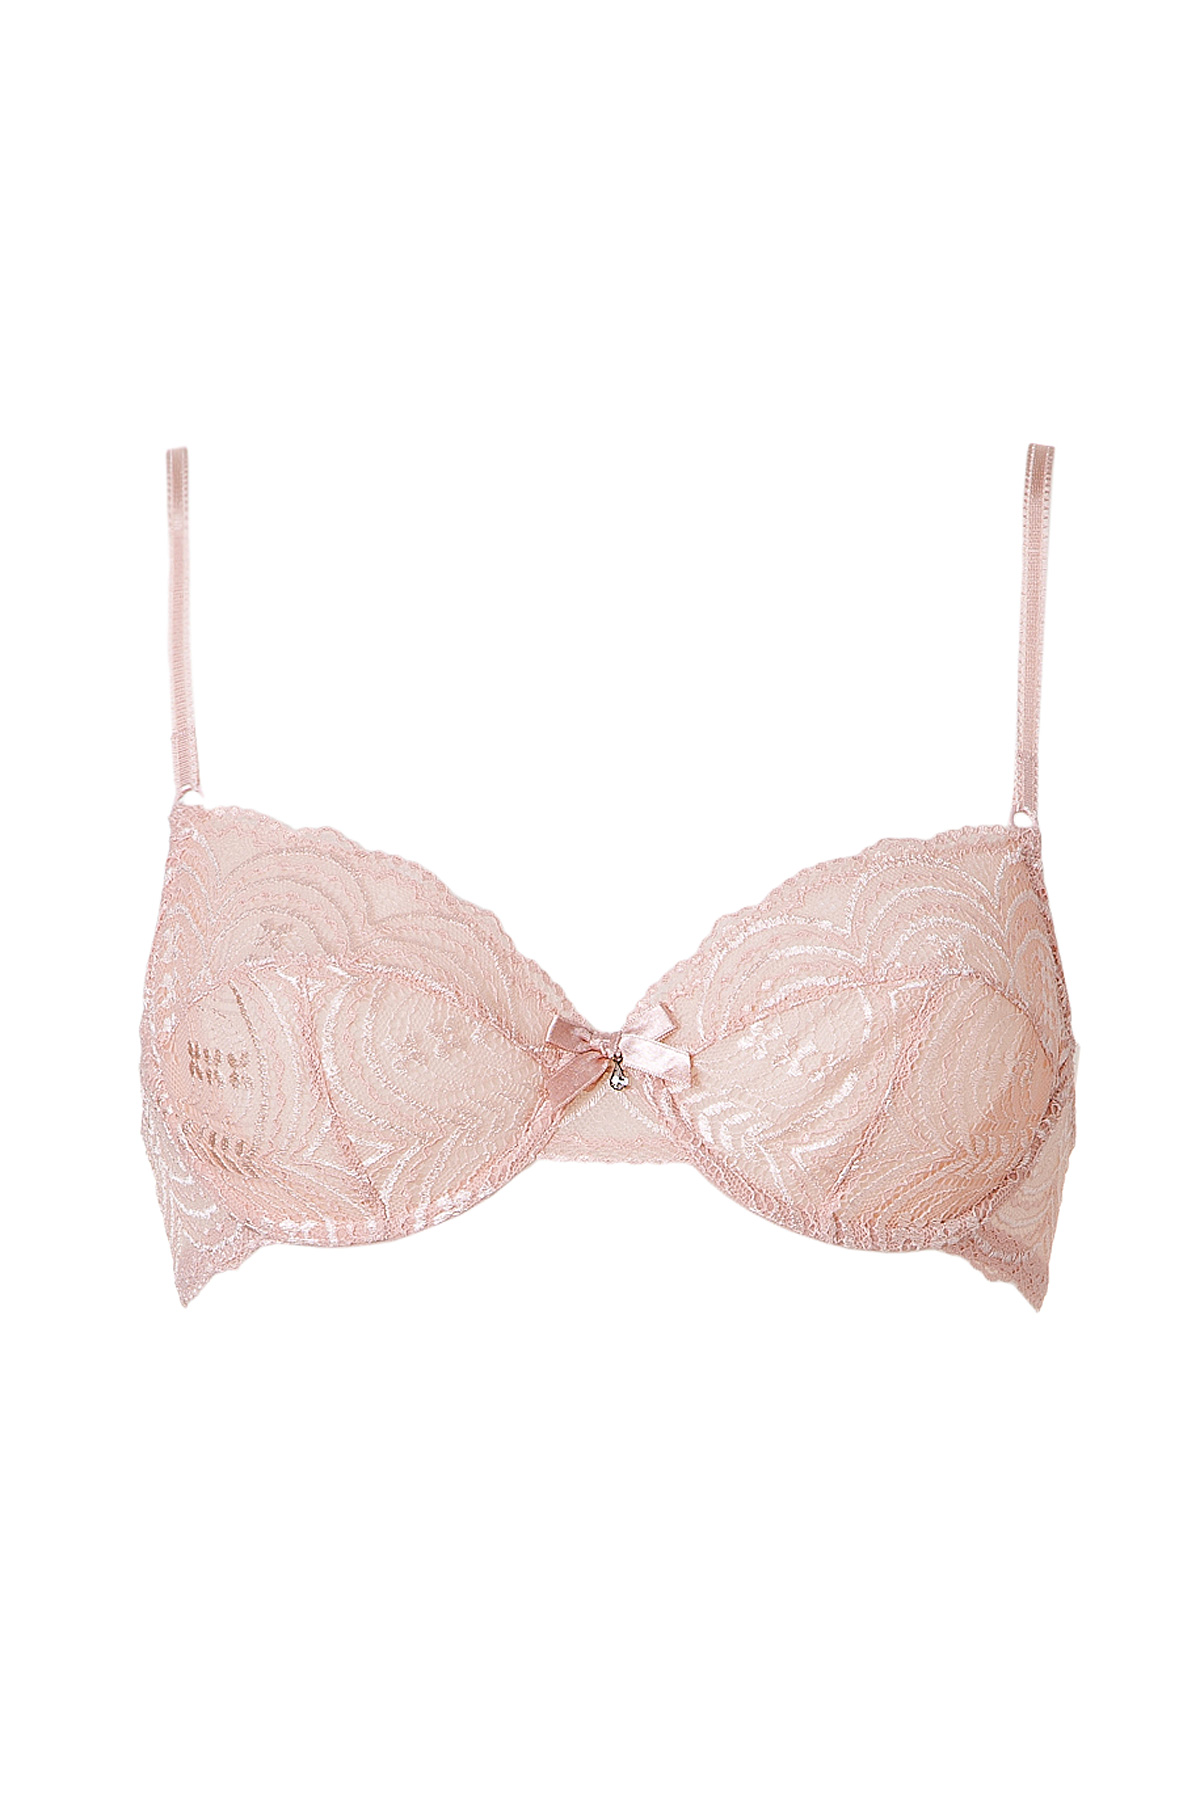 Elle Macpherson The Culotte Soft Nude Lace Underwire Bra in Pink (nude ...